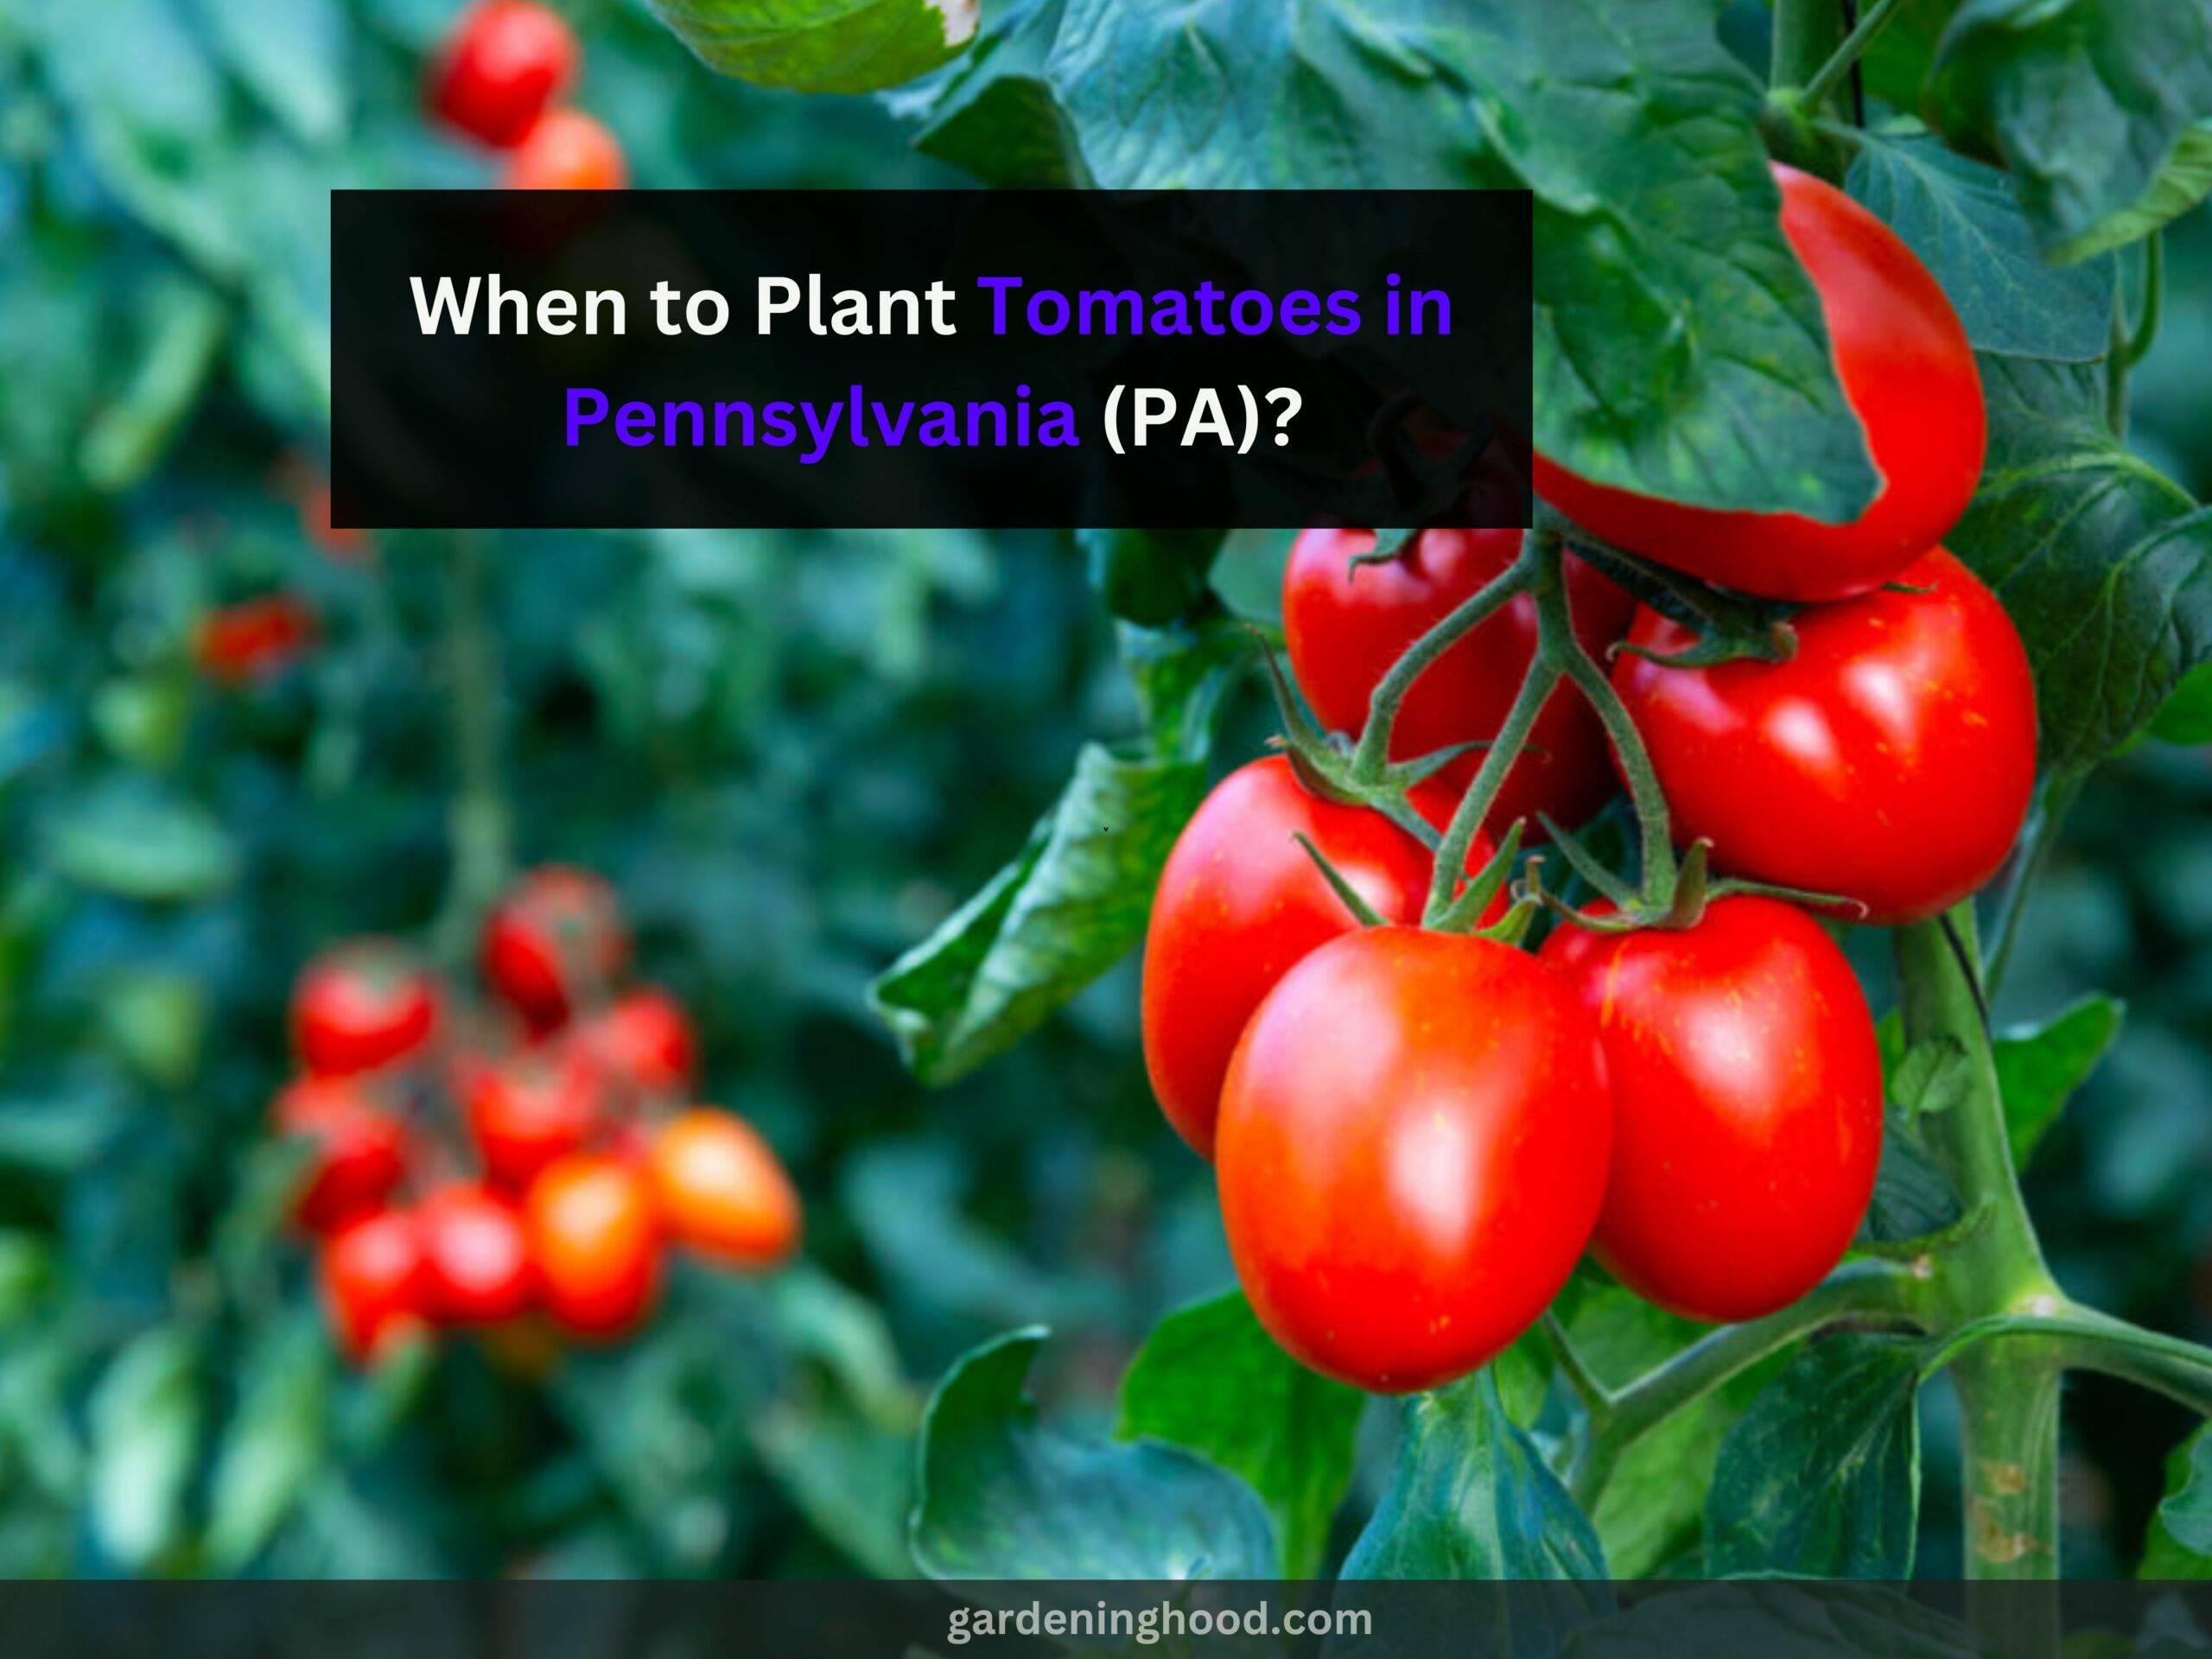 When to Plant Tomatoes in Pennsylvania (PA)?